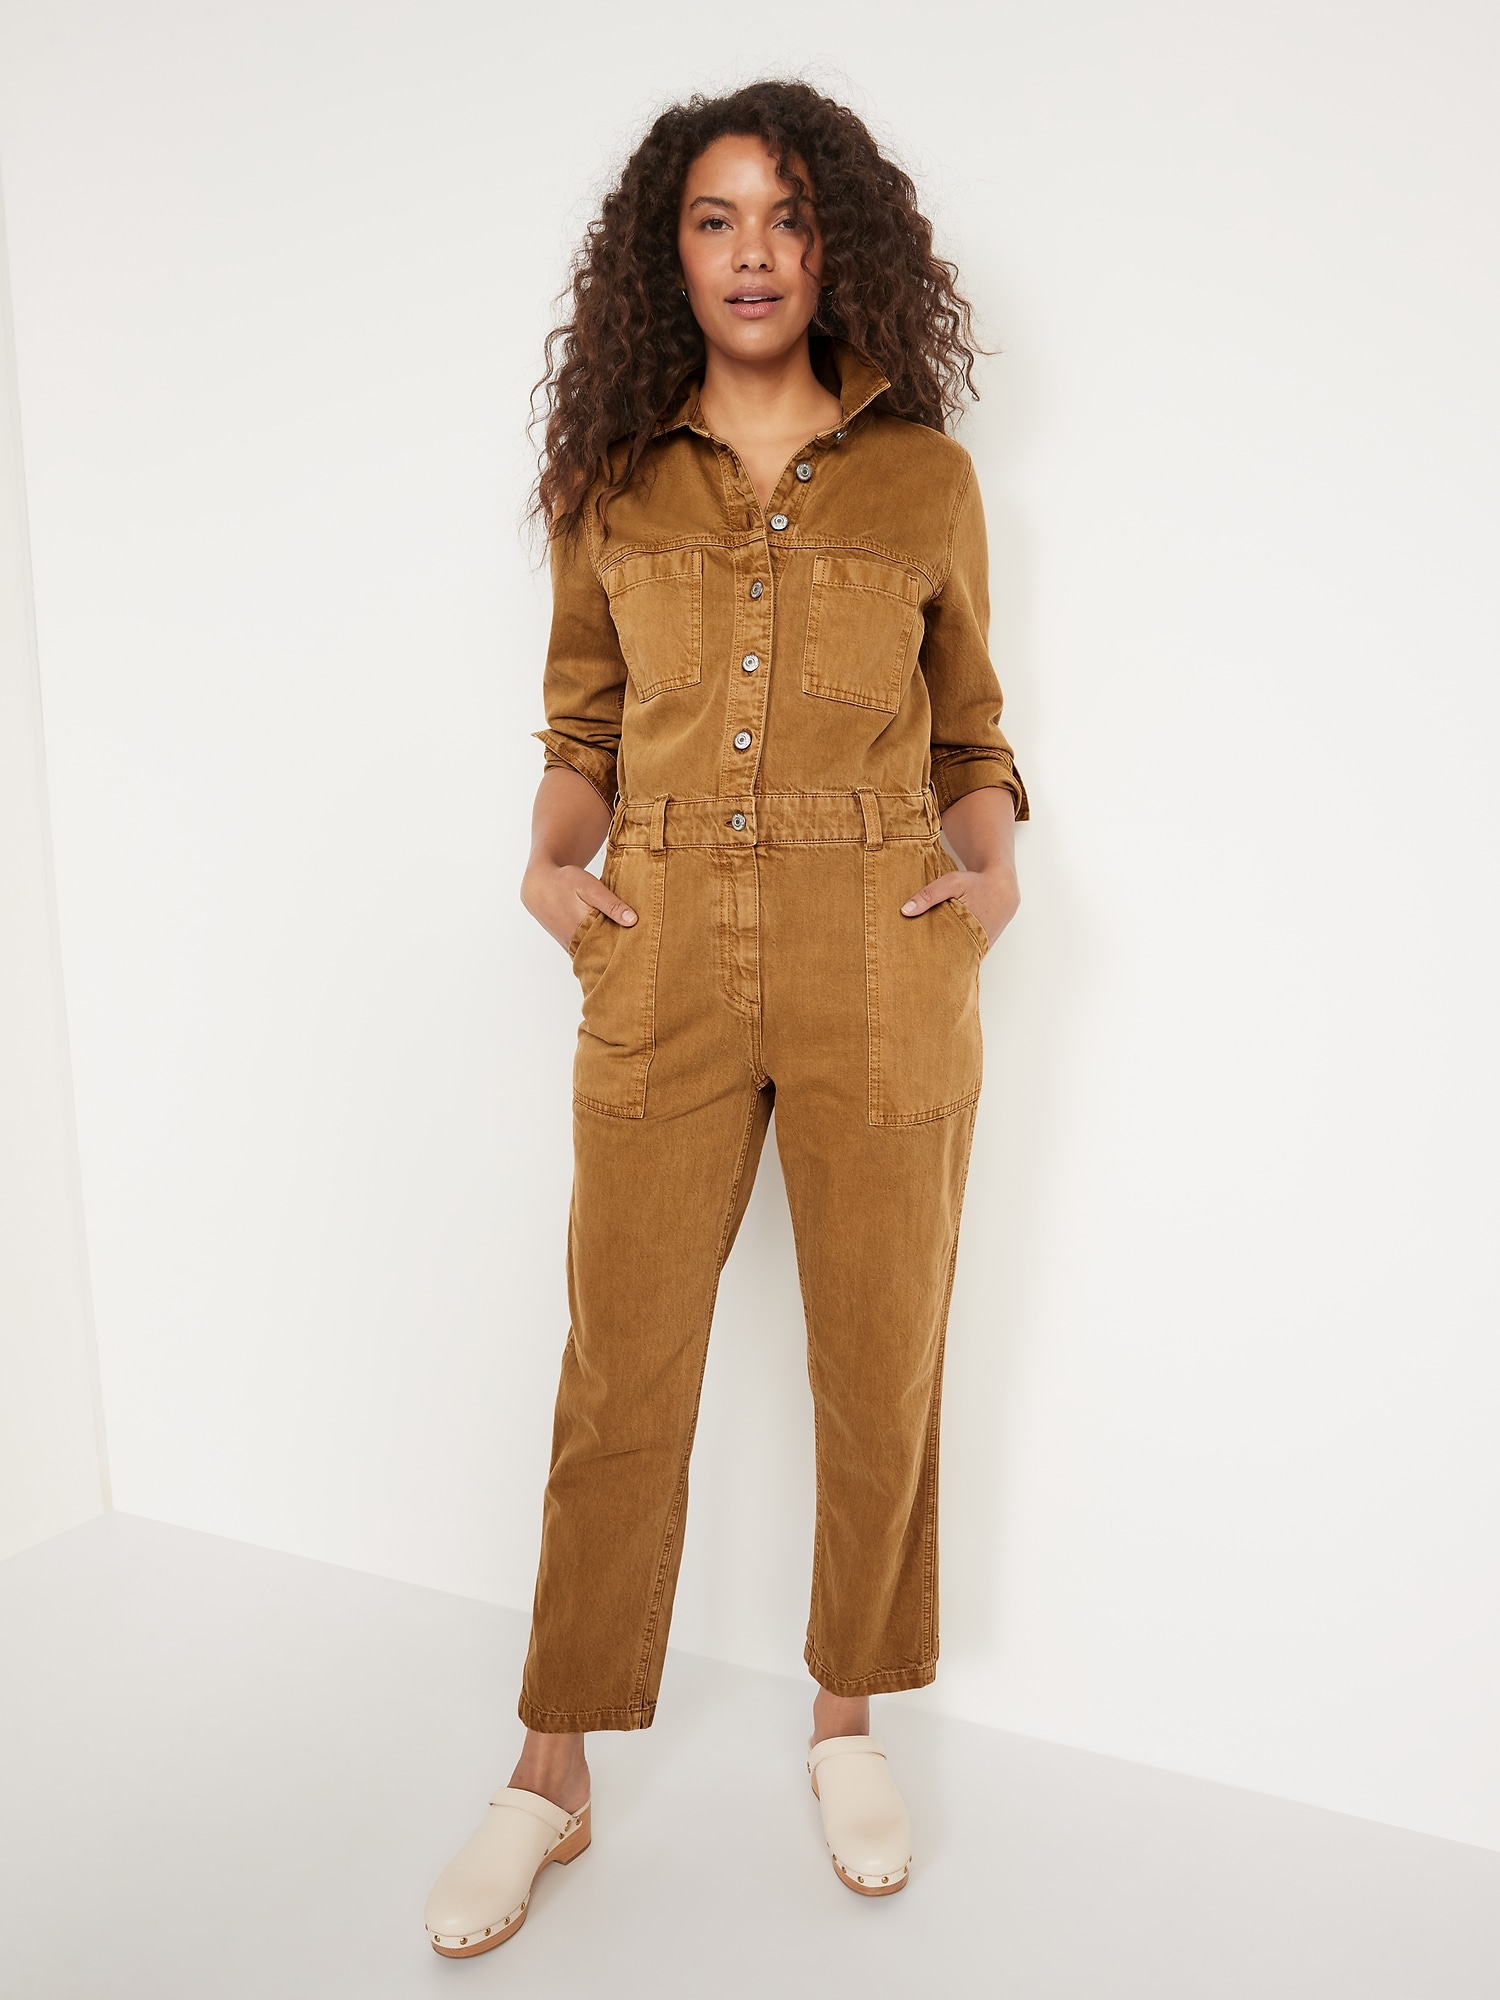 Long-Sleeve Cropped Jean Utility Jumpsuit for Women